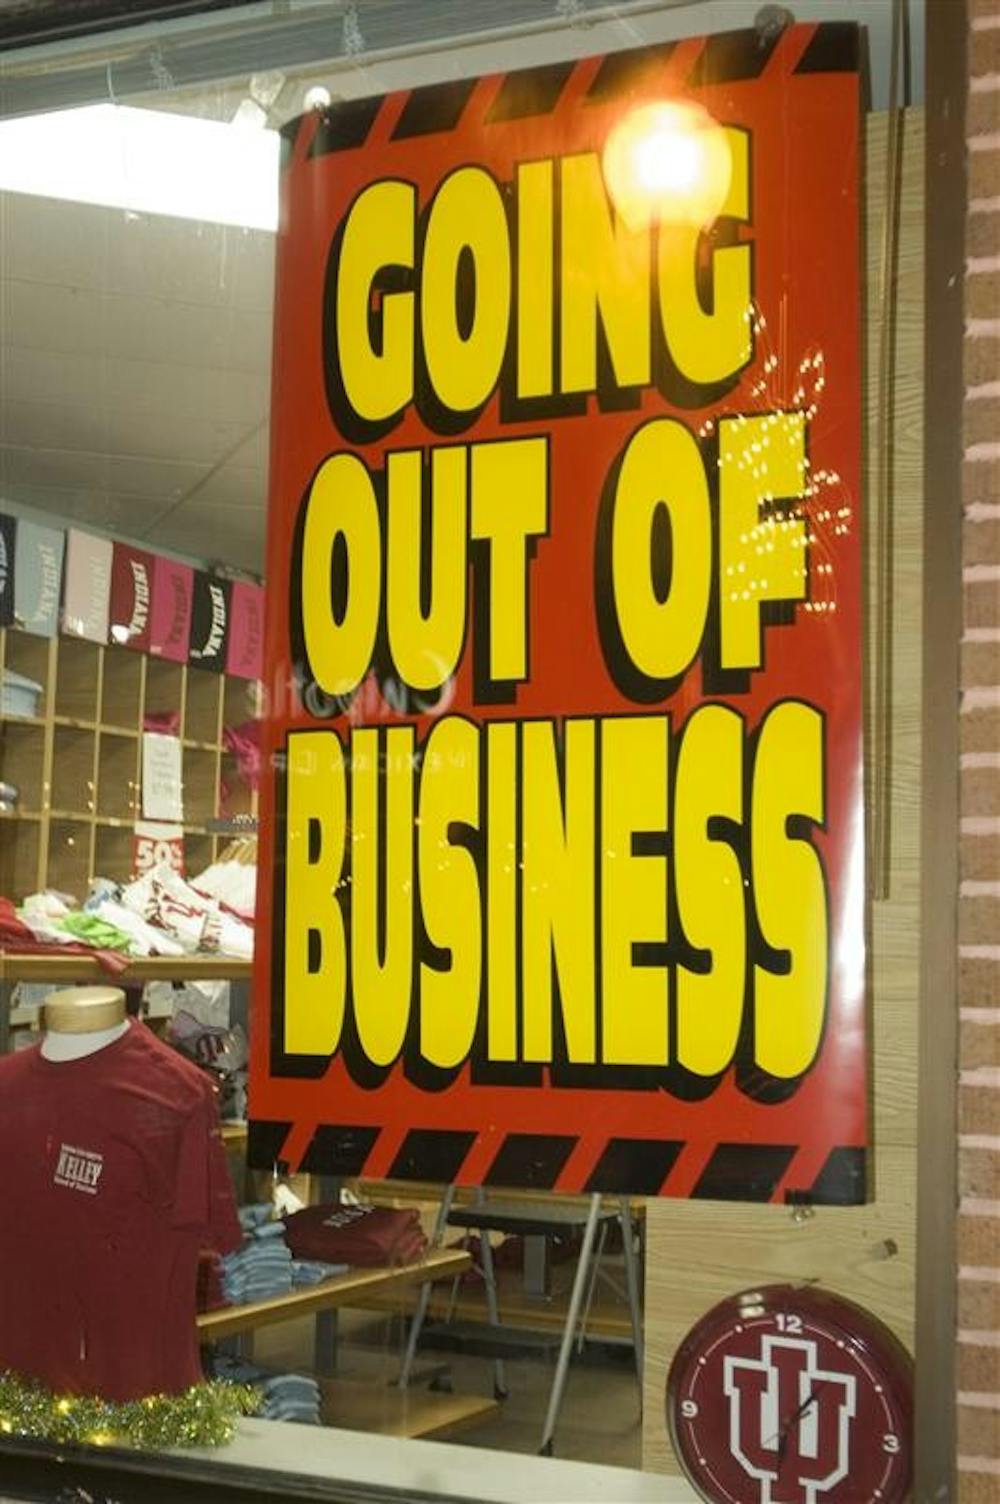 Steve & Barry's, 421 E. Kirkwood Ave., displays a going out of business sign on Monday at the store in anticipation of its closing. The company recently announced it would close its 173 remaining stores after filing for bankruptcy in July.